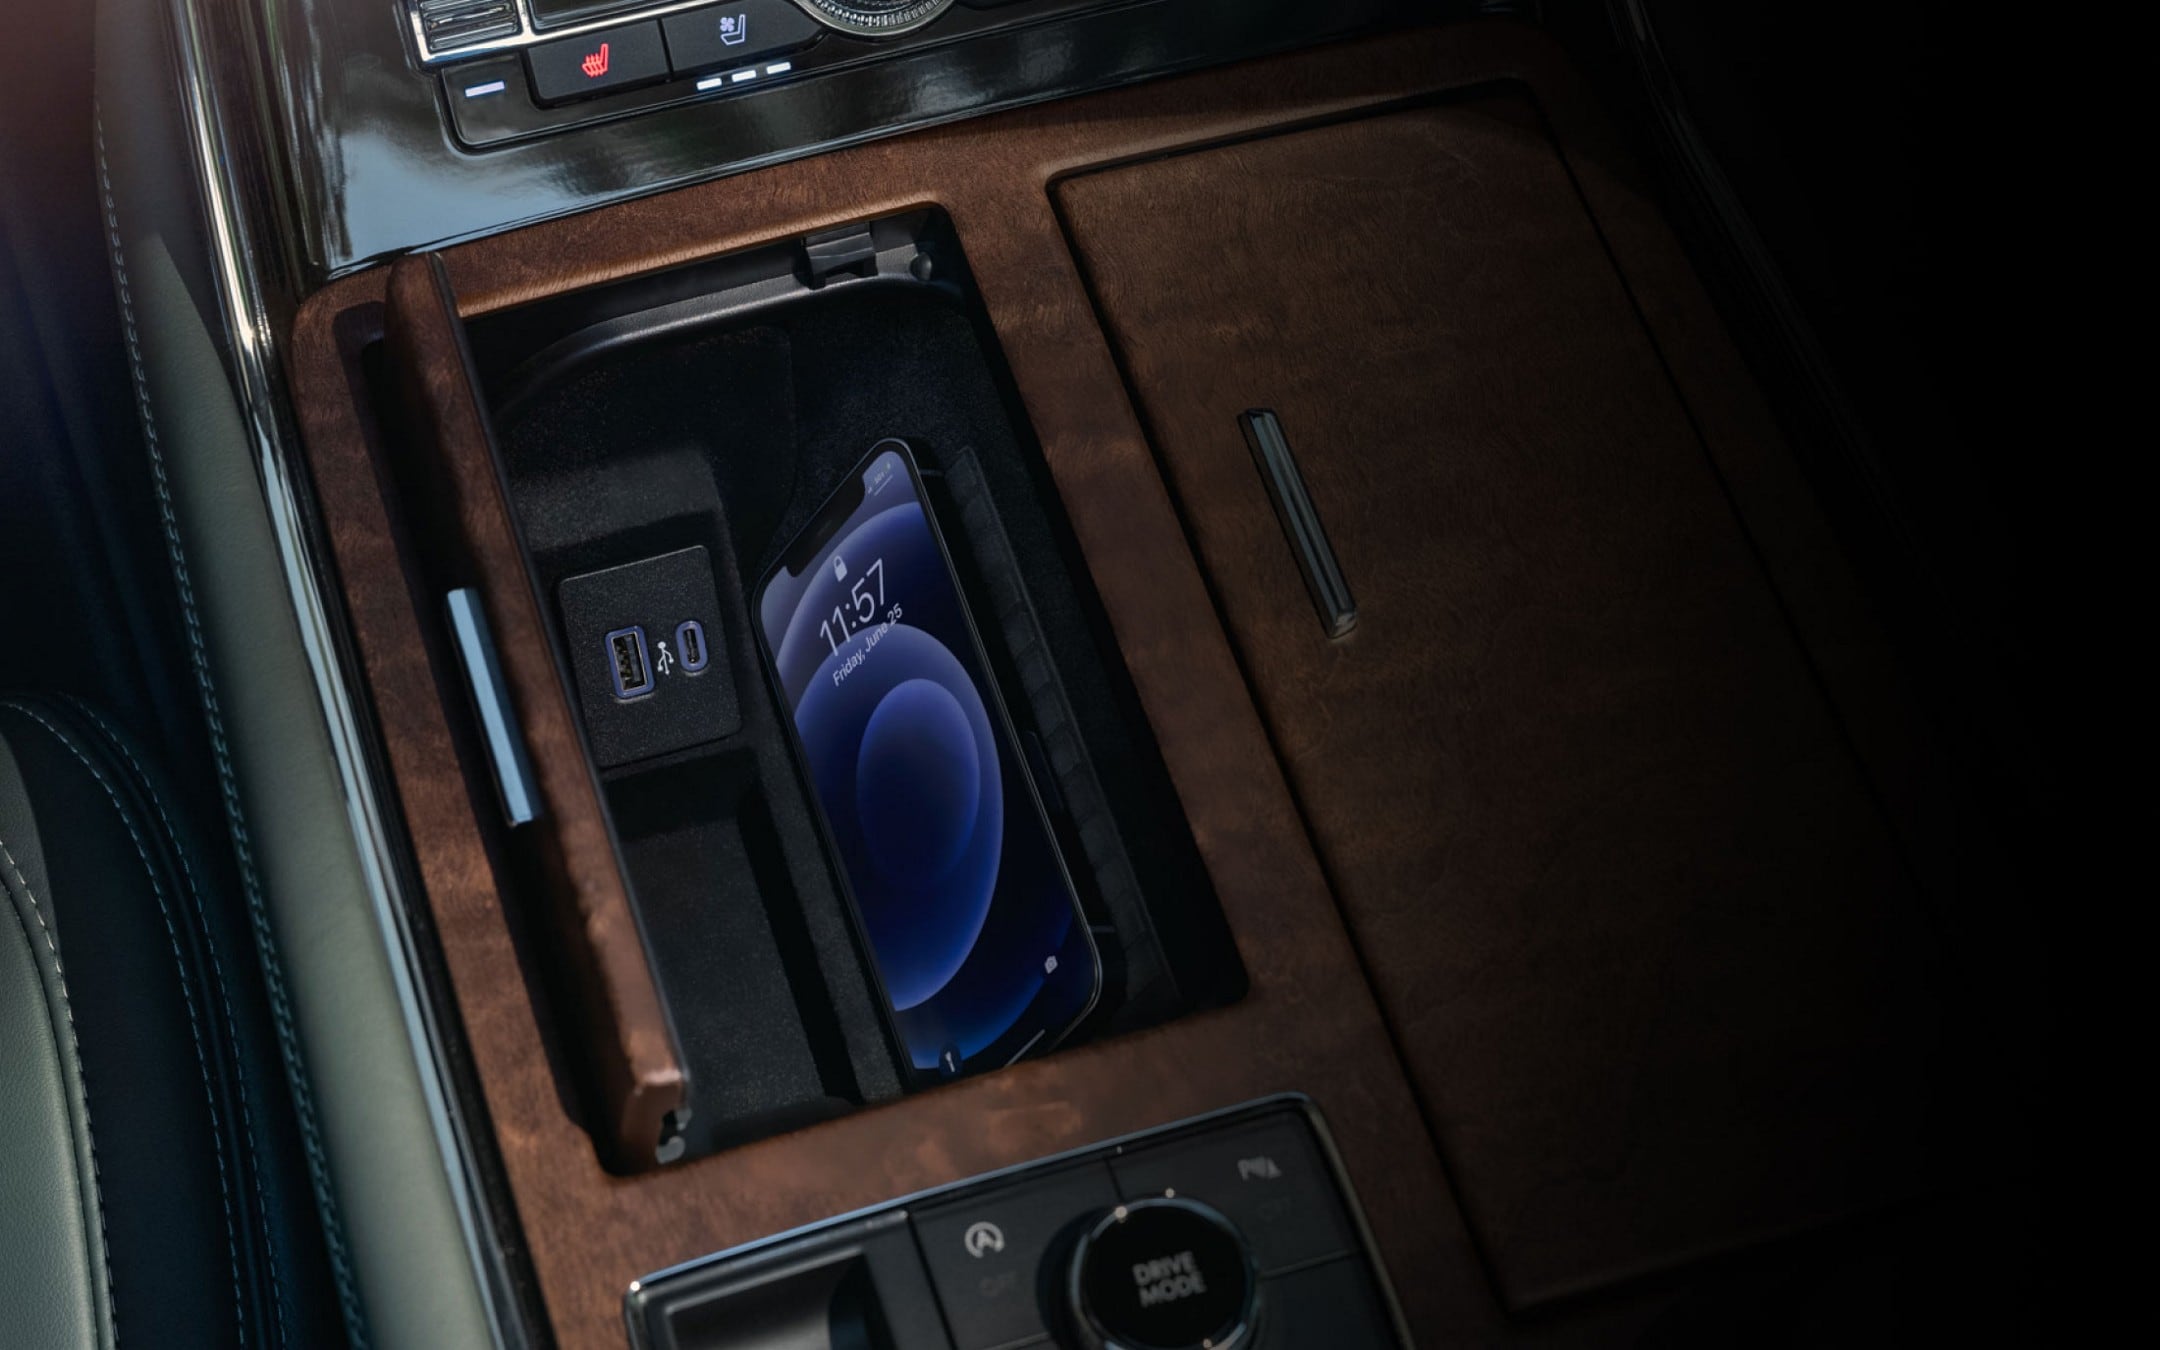 A smartphone is charging on the wireless charging pad that is tucked in a cubby integrated into the front center console